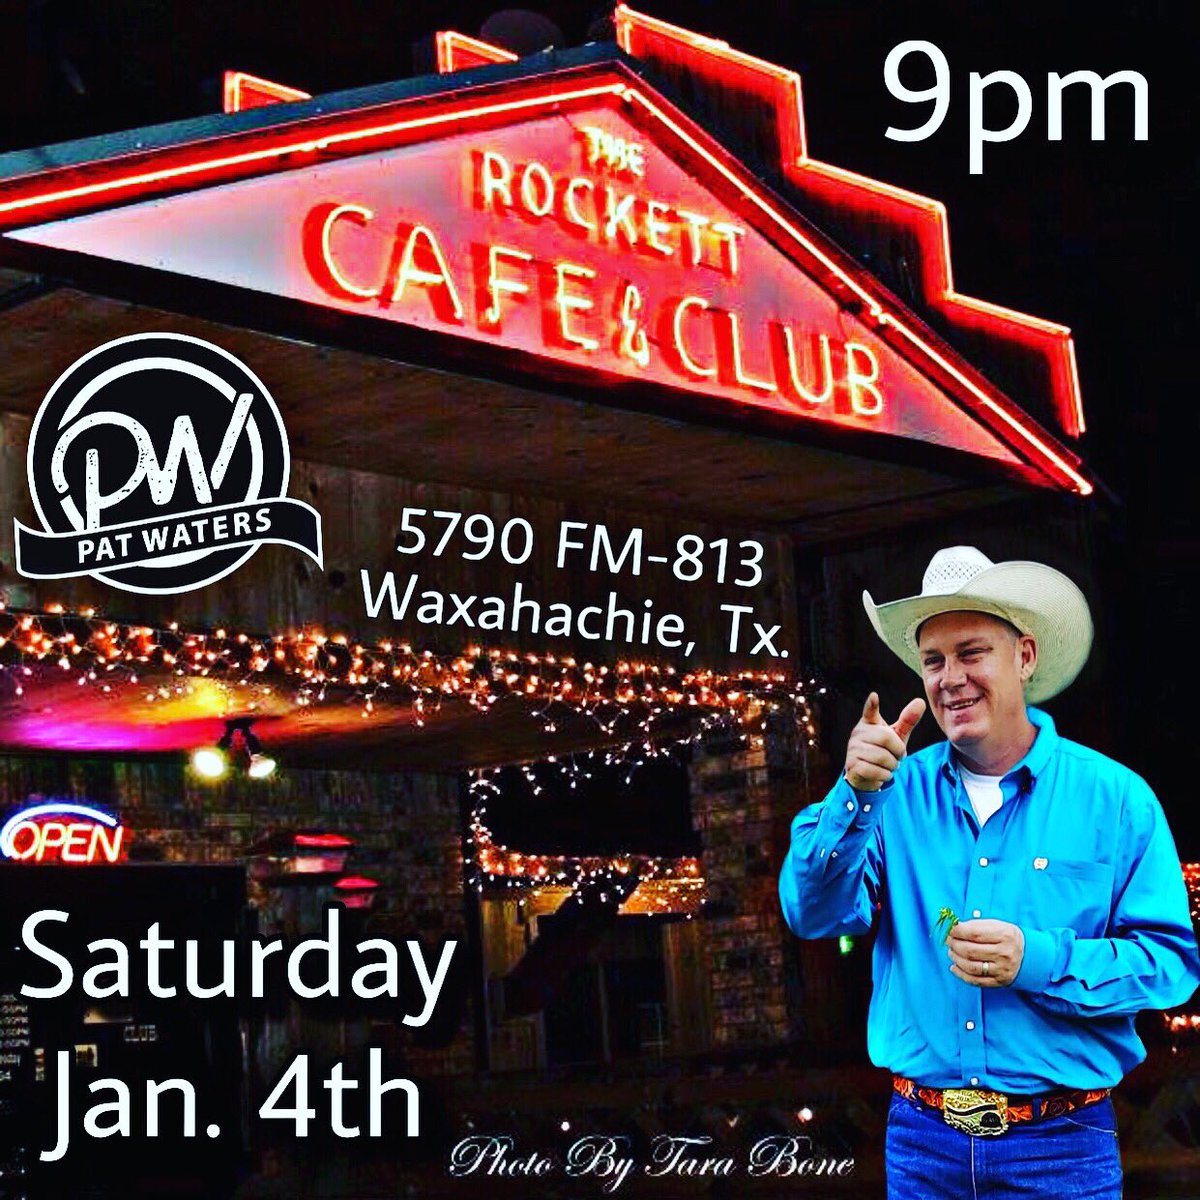 ⭐️Sat.1/4: Pat Waters live @ the Rockett Cafe & Club in Waxahachie, Tx! @patwatersmusic #therockettcafe #waxahachietexas #texaslivemusic #patwaters #livemusic #texascountry #comingfromatexan #dancing #cafe #texasmusic #dancehallcountry #texashillcountry #musicmedia